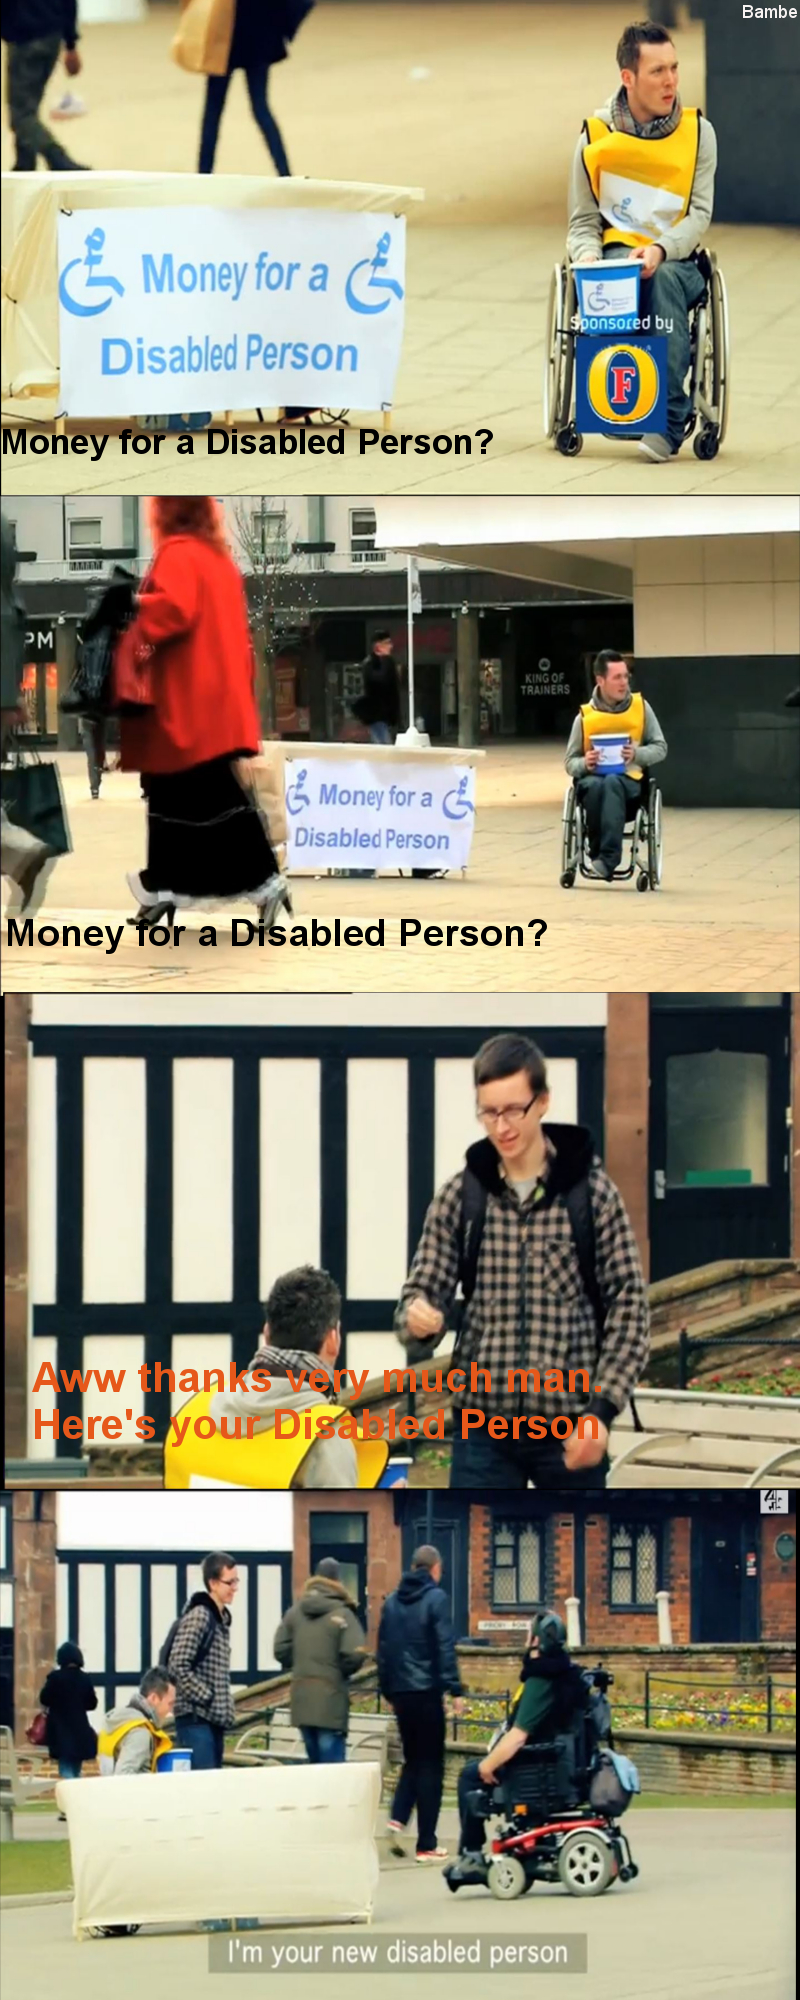 Money for a Disabled Person